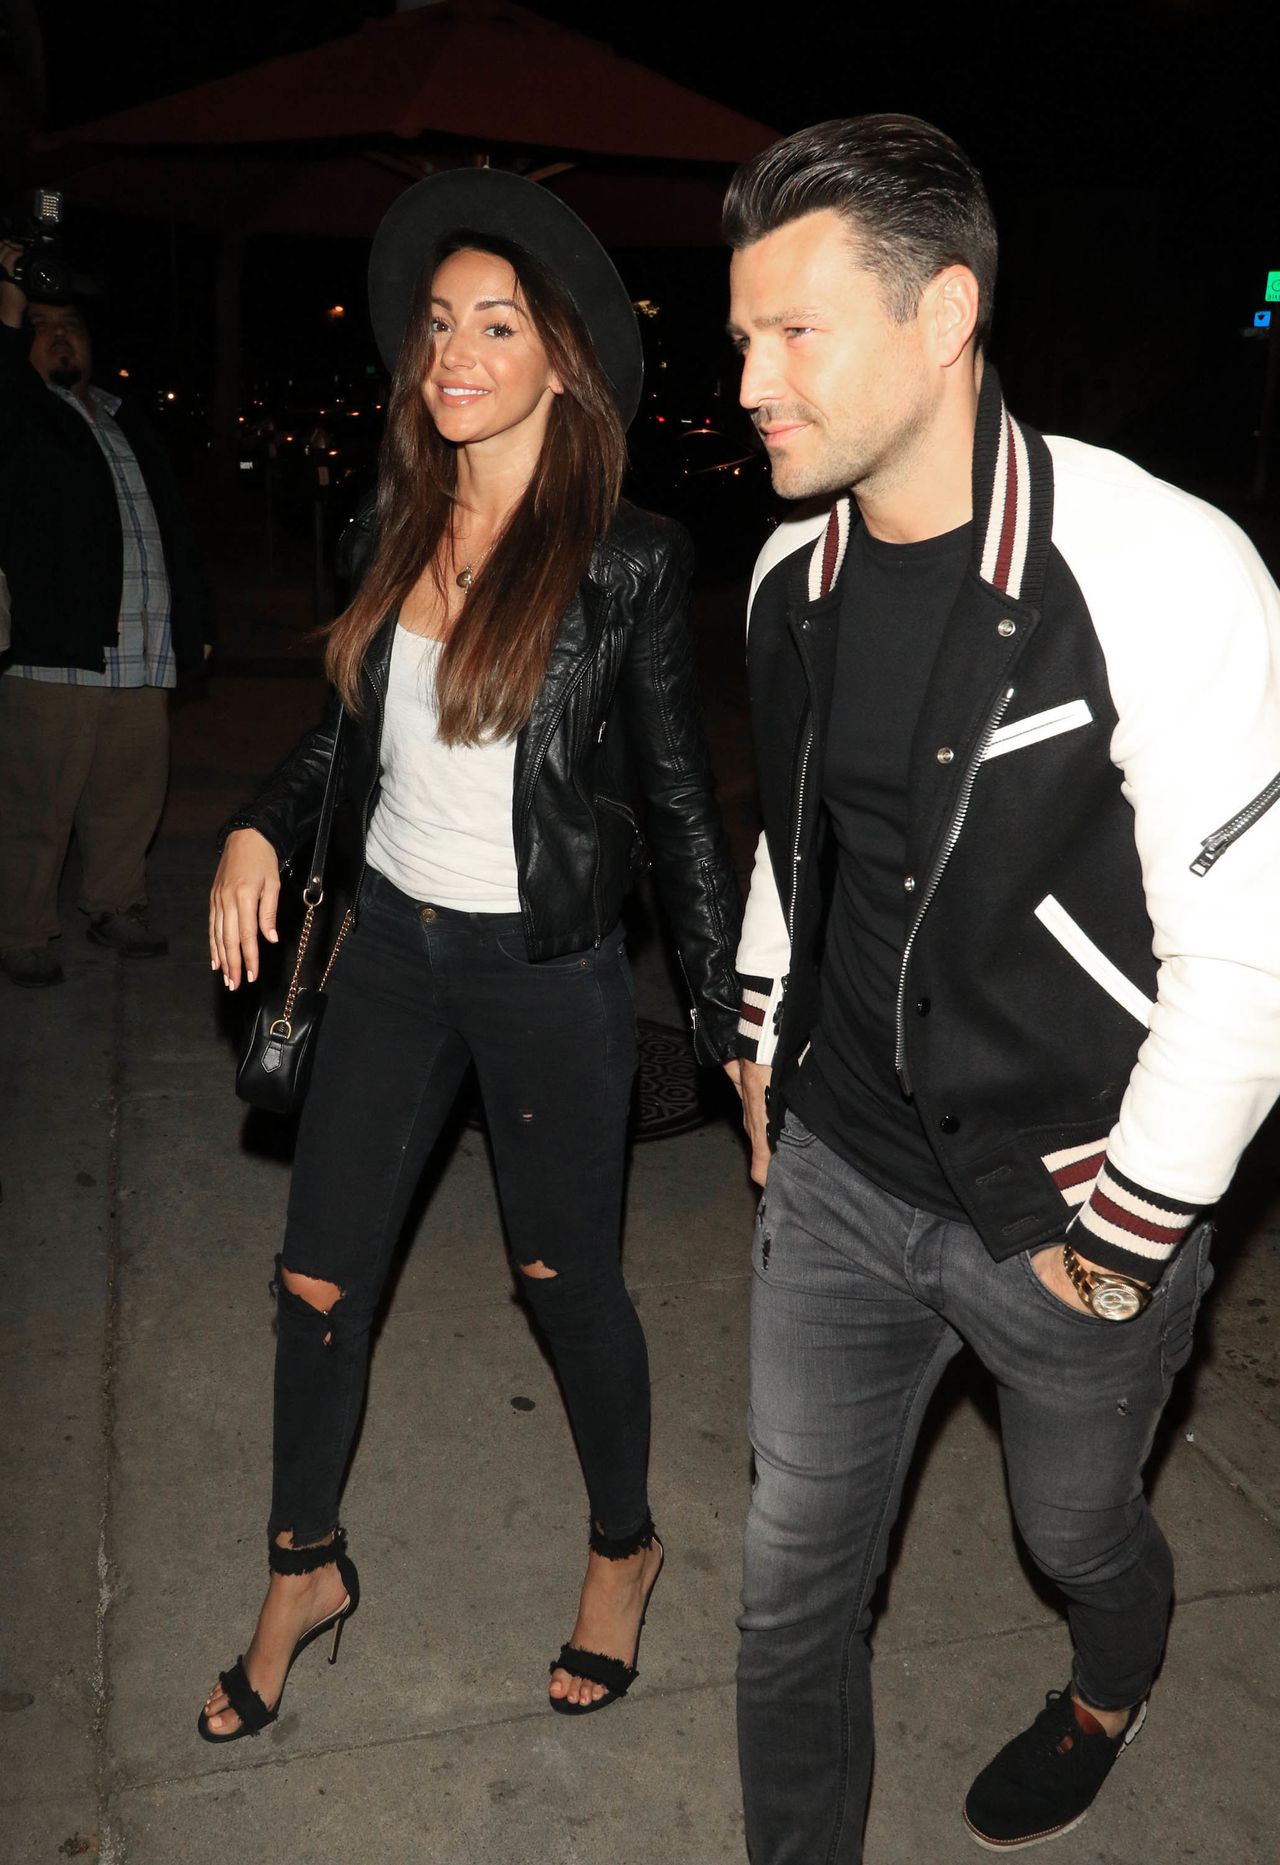 Mark with wife Michelle Keegan